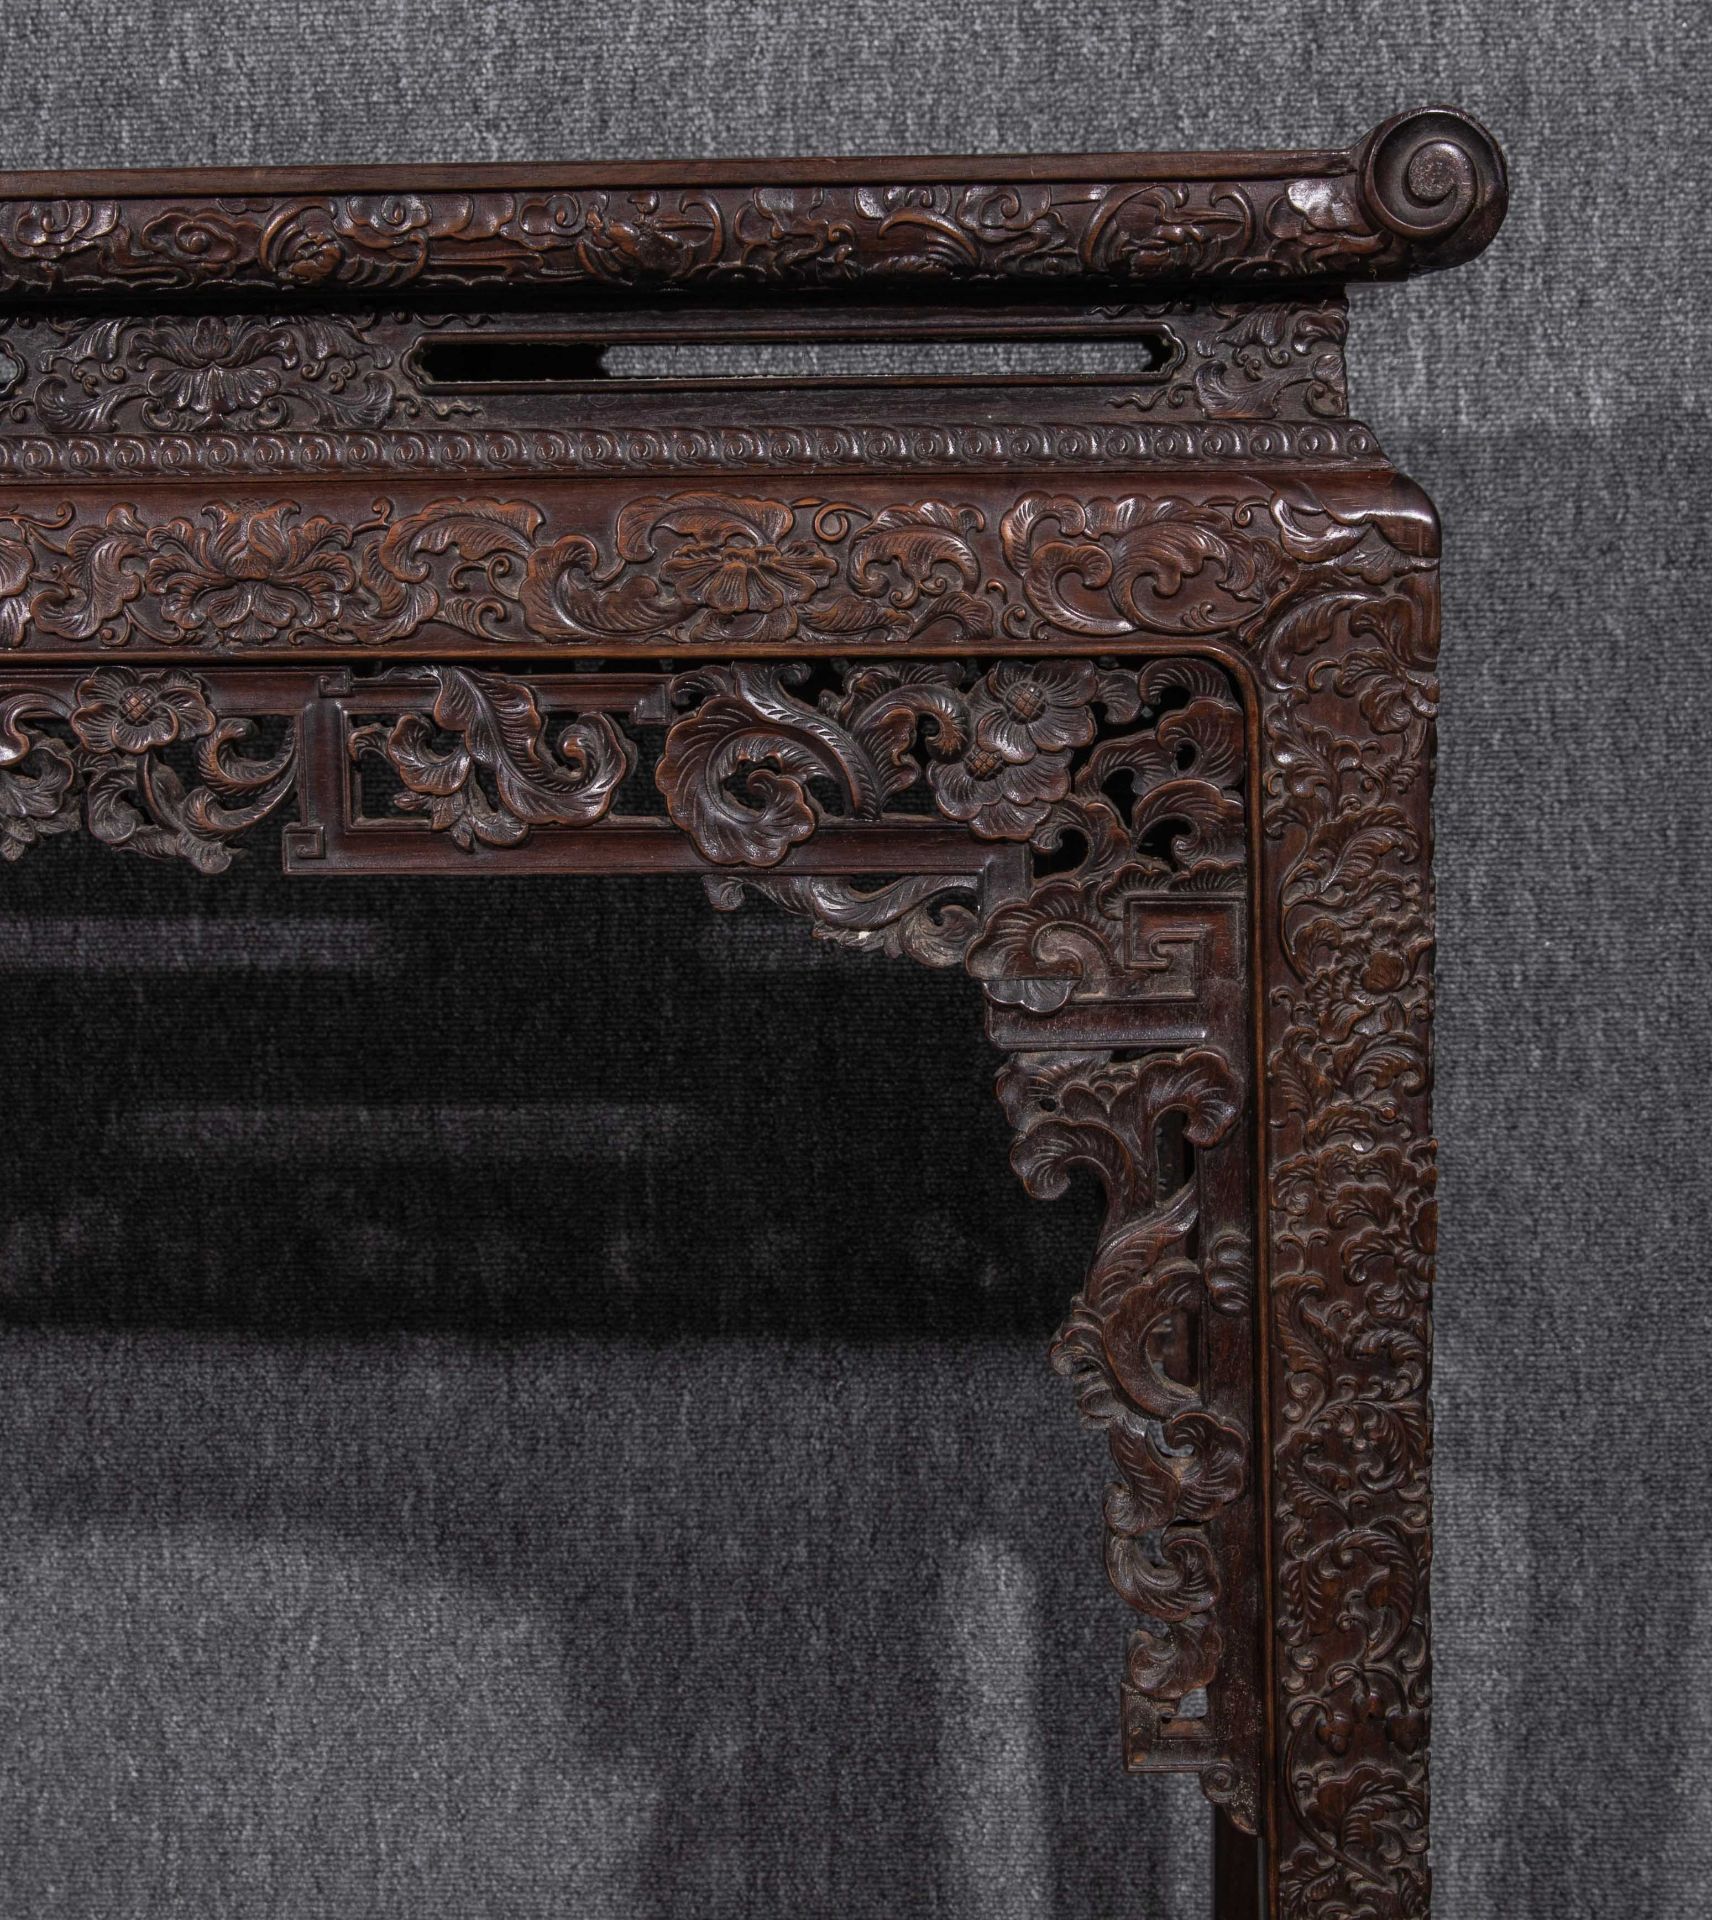 Chinese Qing Dynasty rosewood desk - Image 4 of 10